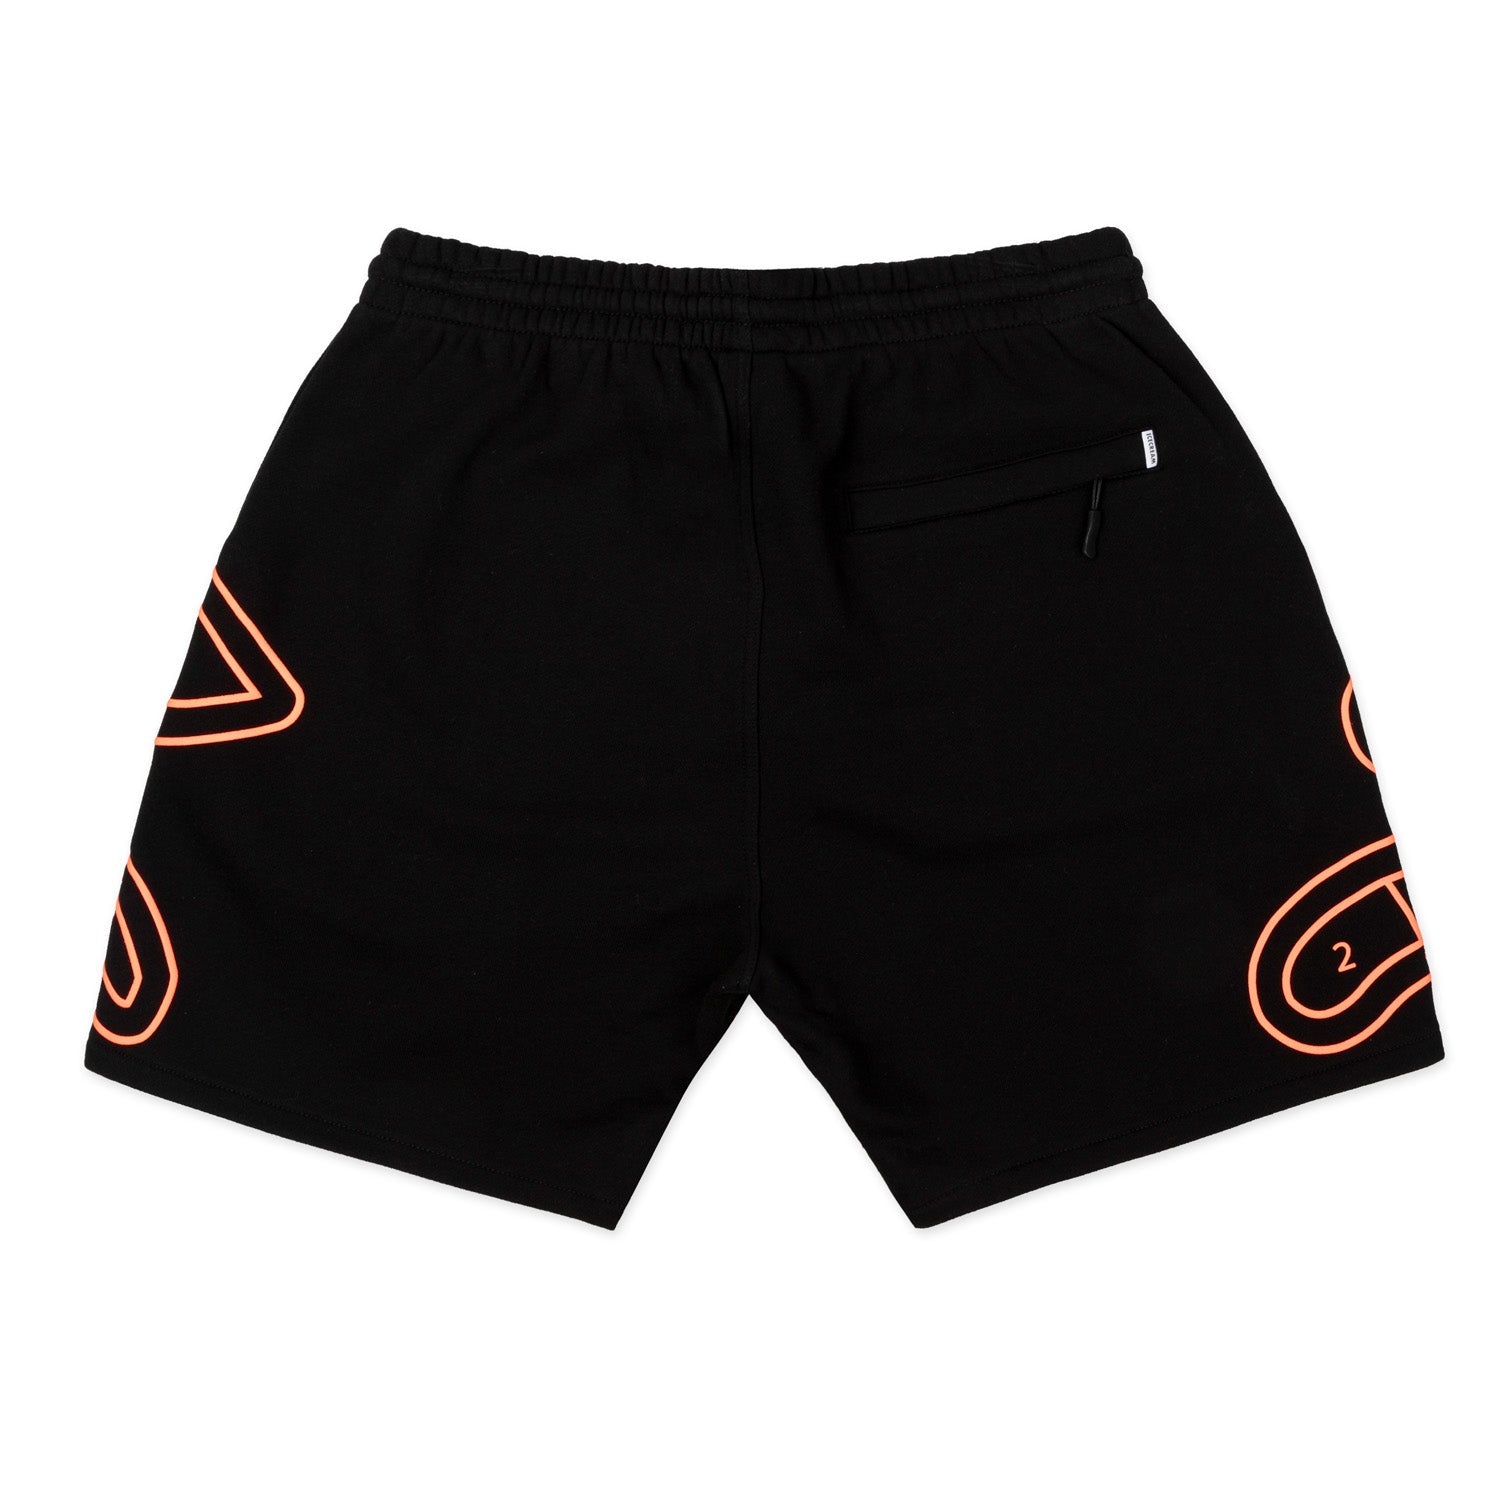 ICECREAM Men Over and Out Short Black - SHORTS - Canada